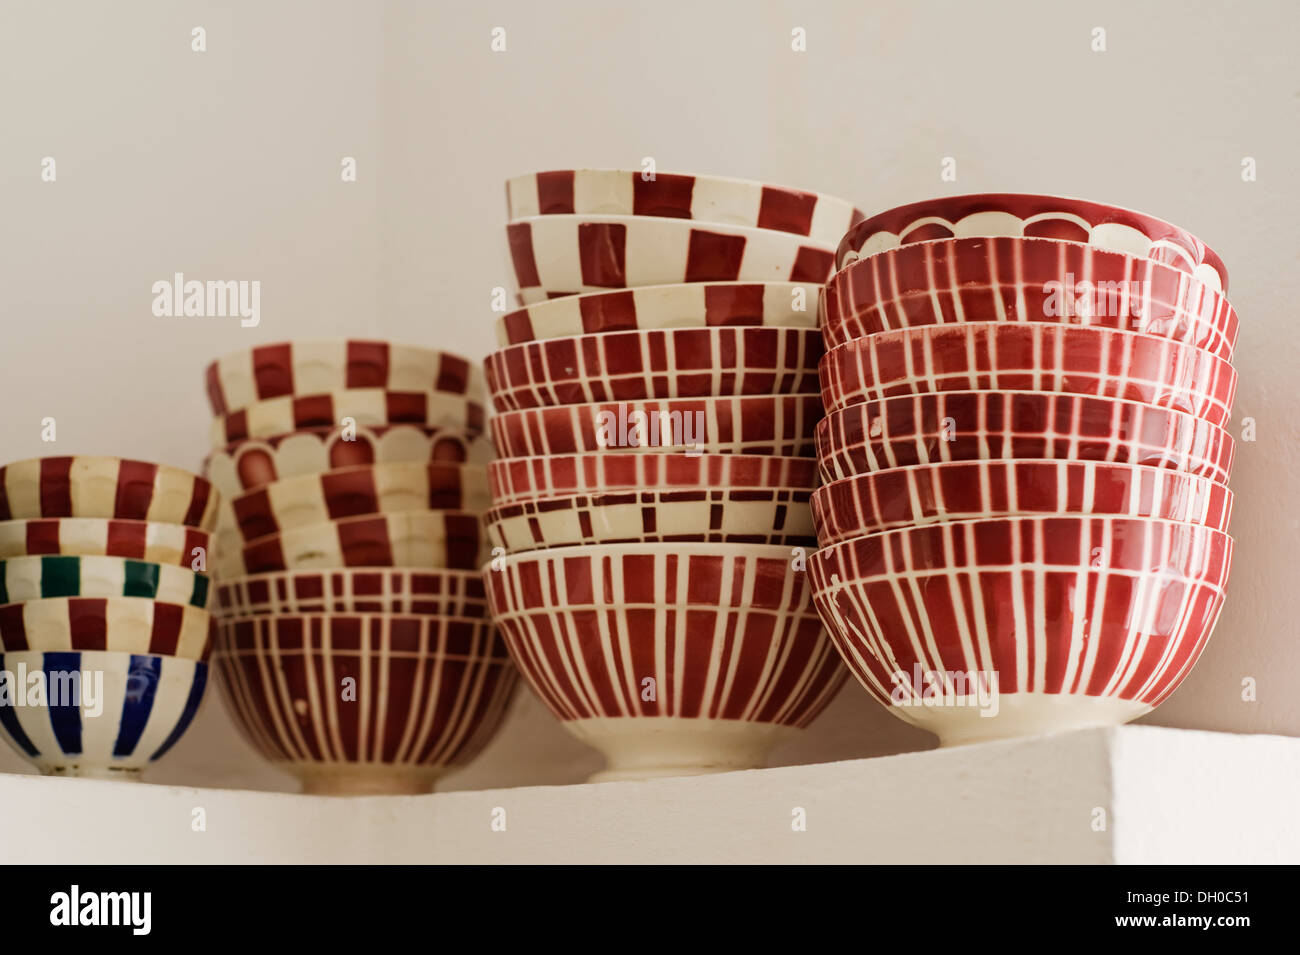 Handpainted Moroccan bowls Stock Photo